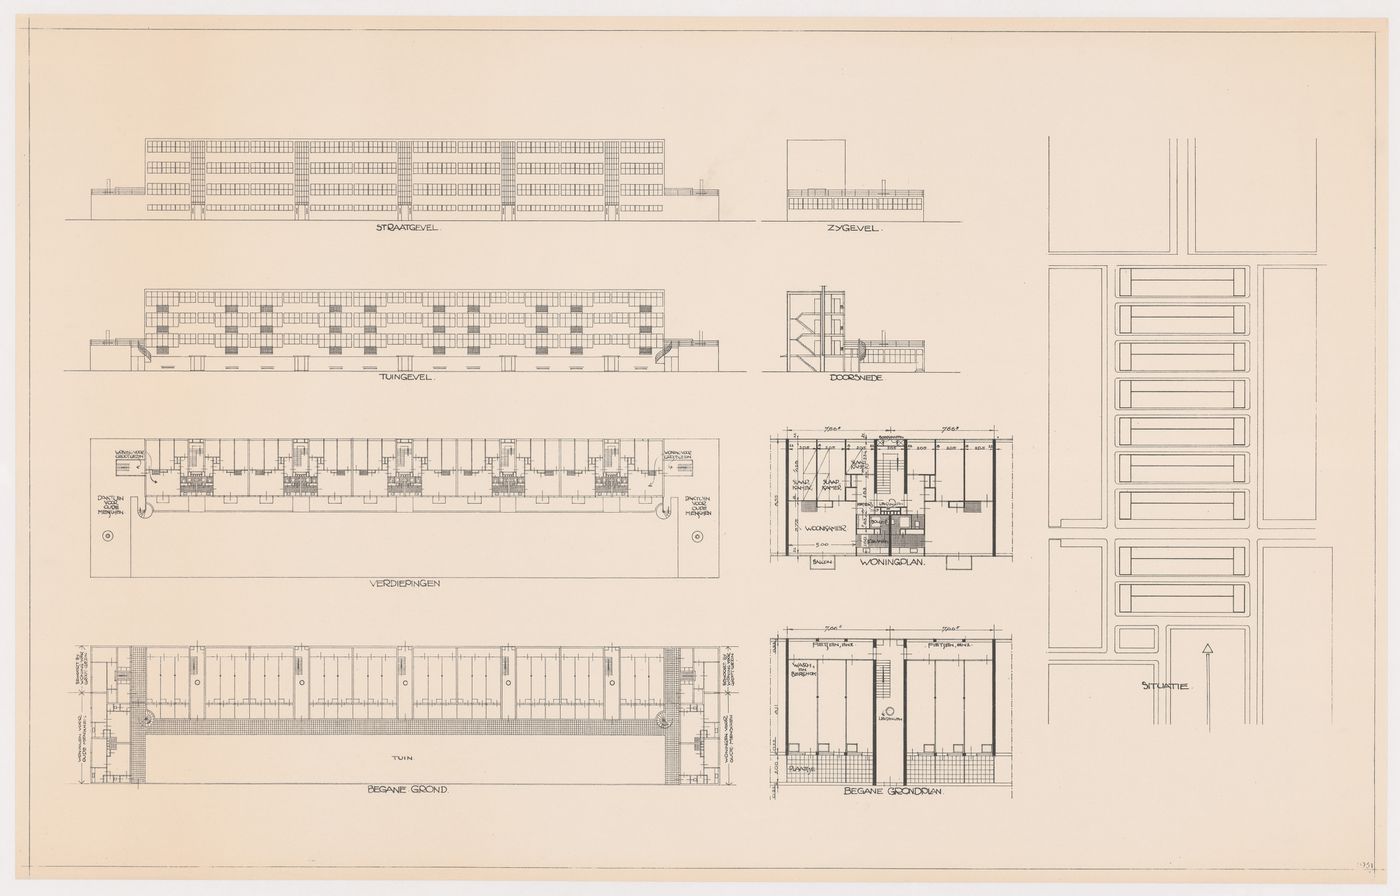 Site plan, plans, section, and elevations for housing units for Blijdorp Workers' Housing Quarter, Rotterdam, Netherlands